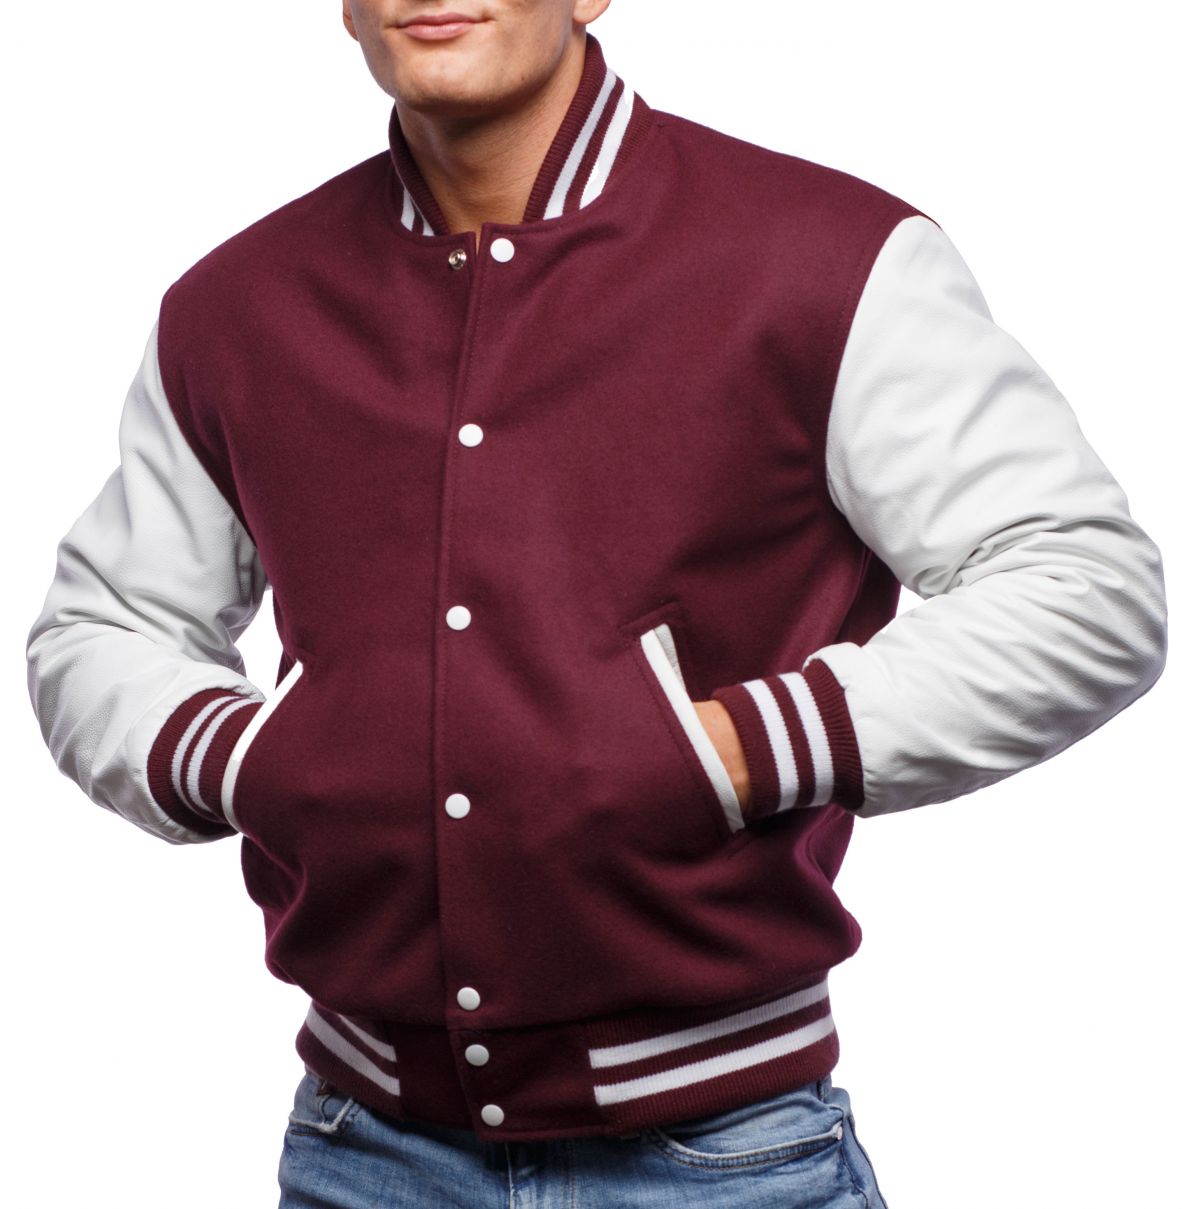 Maroon Wool Body & Bright White Leather Sleeves Letterman Jacket